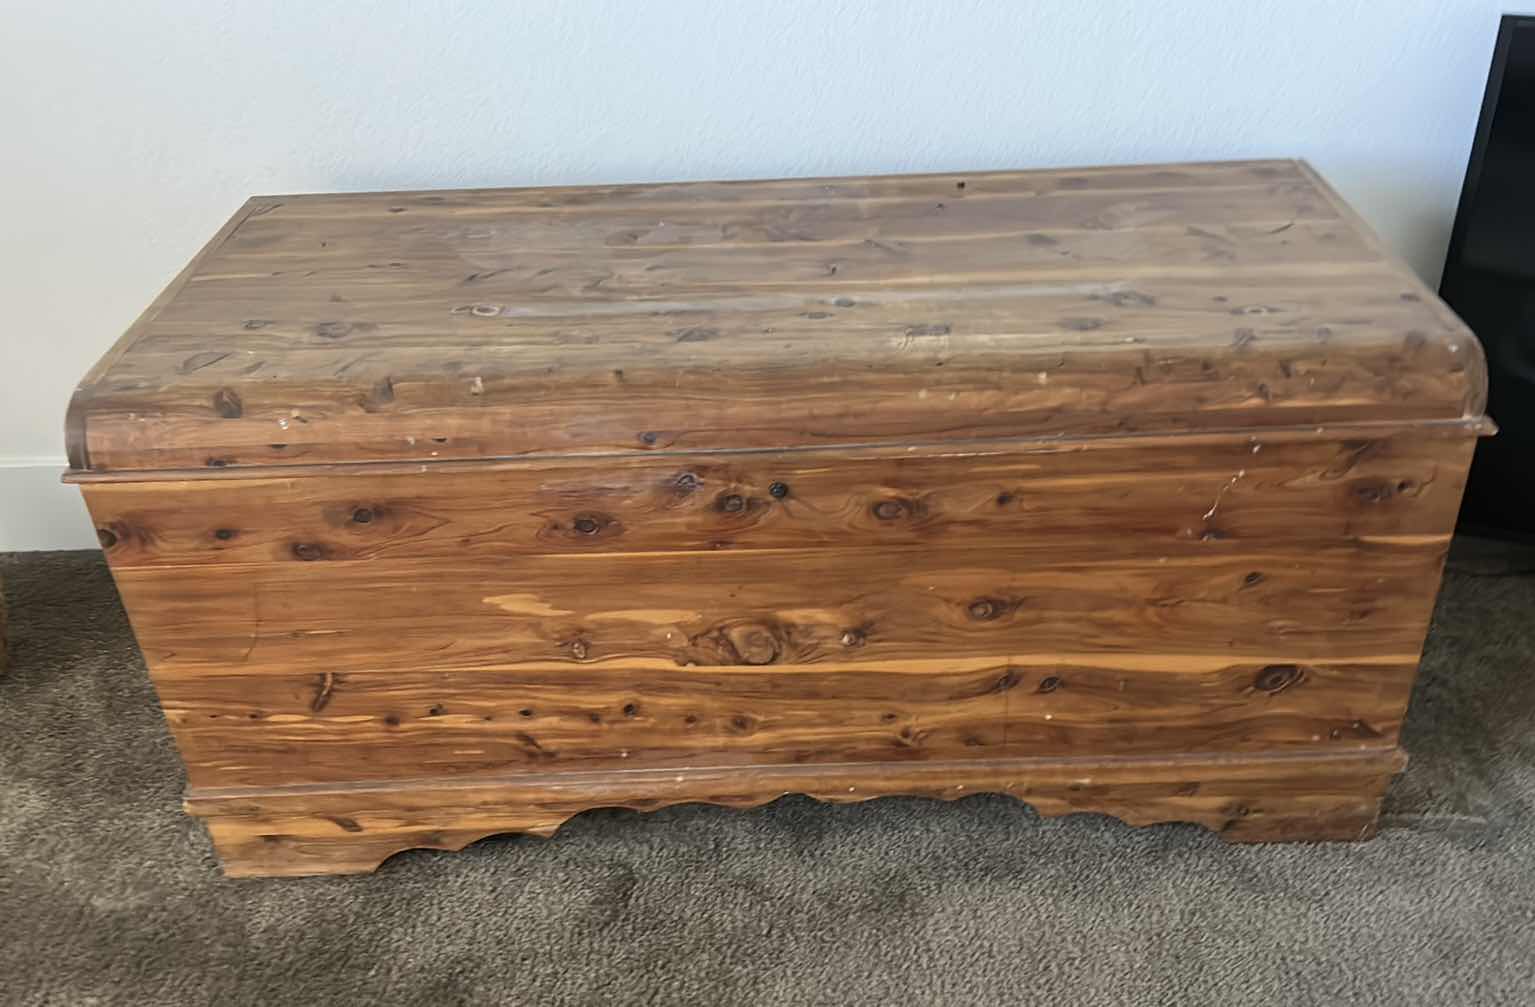 Photo 1 of VINTAGE CEDAR LINED WOOD HOPE CHEST 46” x 20” x 22”